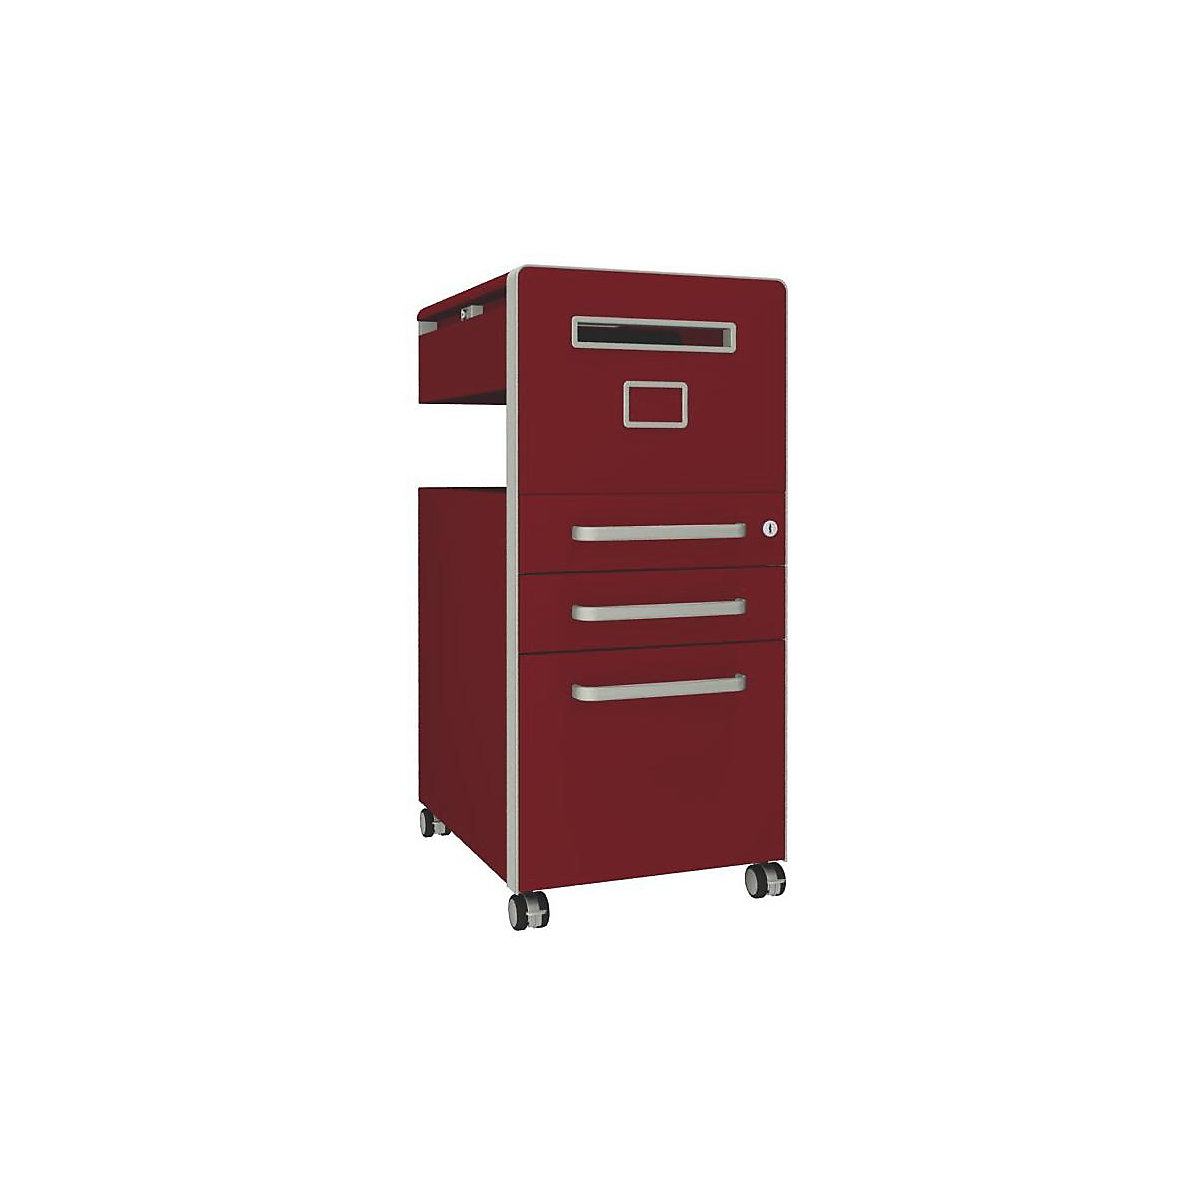 Bite™ pedestal furniture, with 1 whiteboard, opens on the right side – BISLEY, with 2 universal drawers, 1 suspension file drawer, cardinal red-20